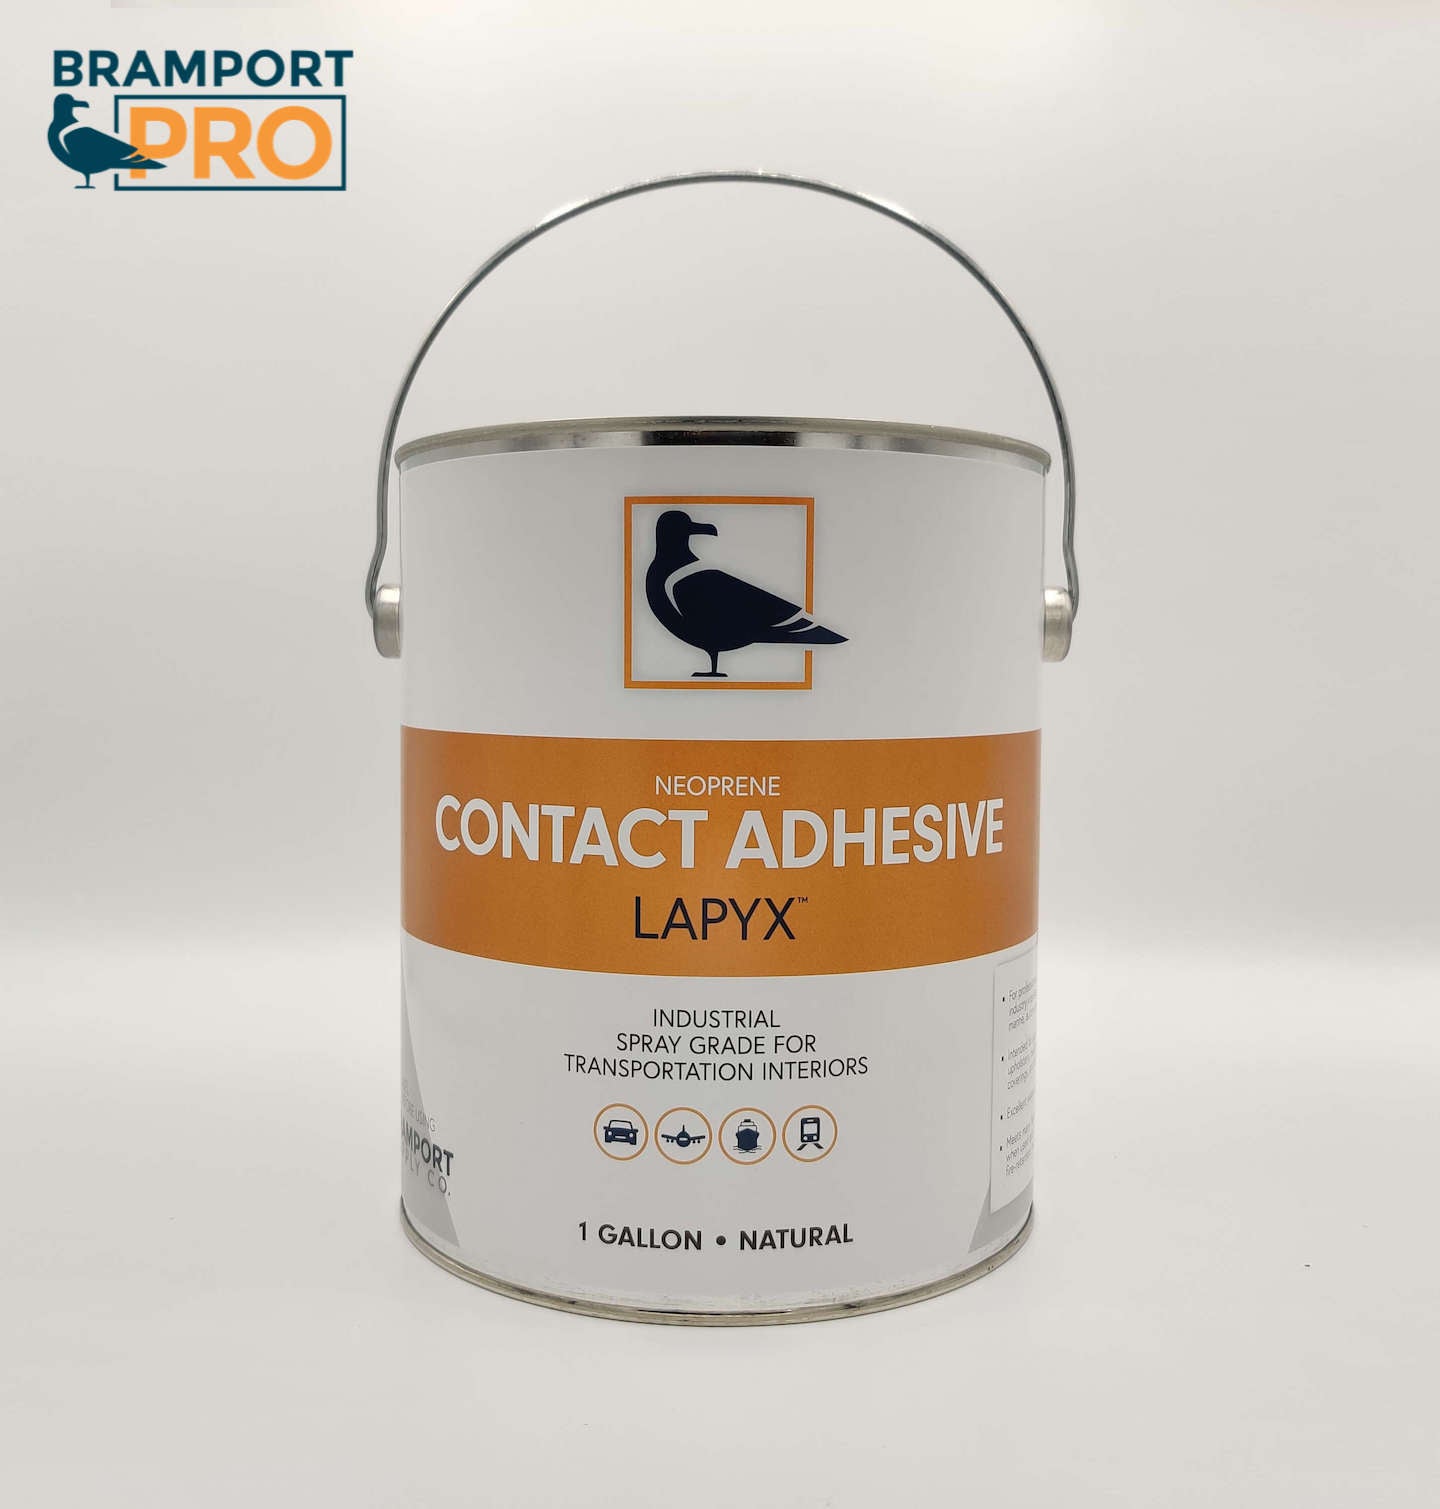 LAPYX Contact Adhesive – Bramport Supply Co.